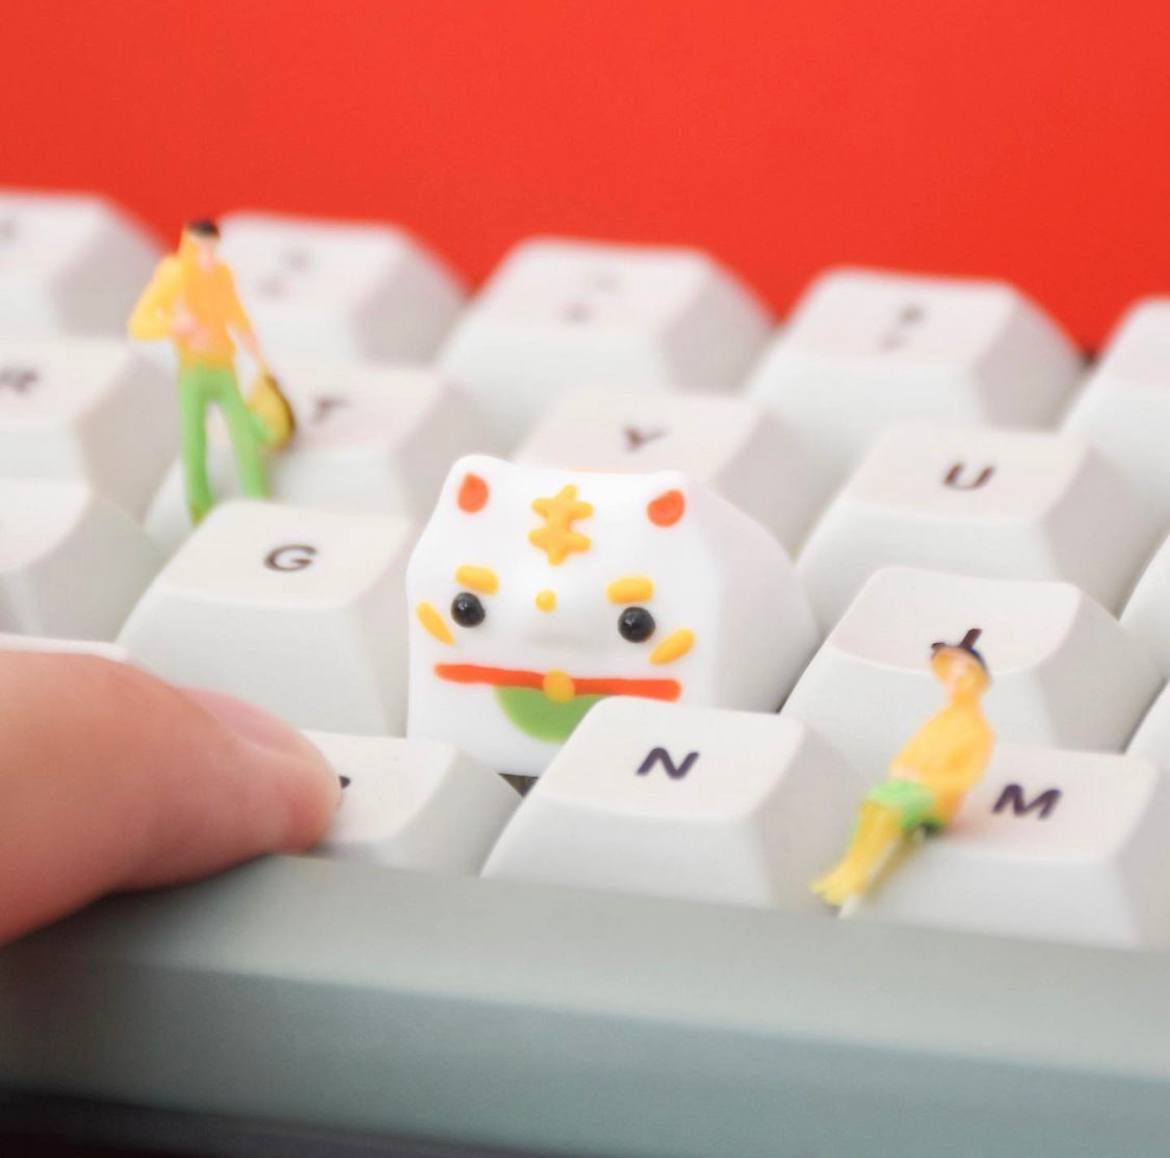 Put on your Fun Keycaps